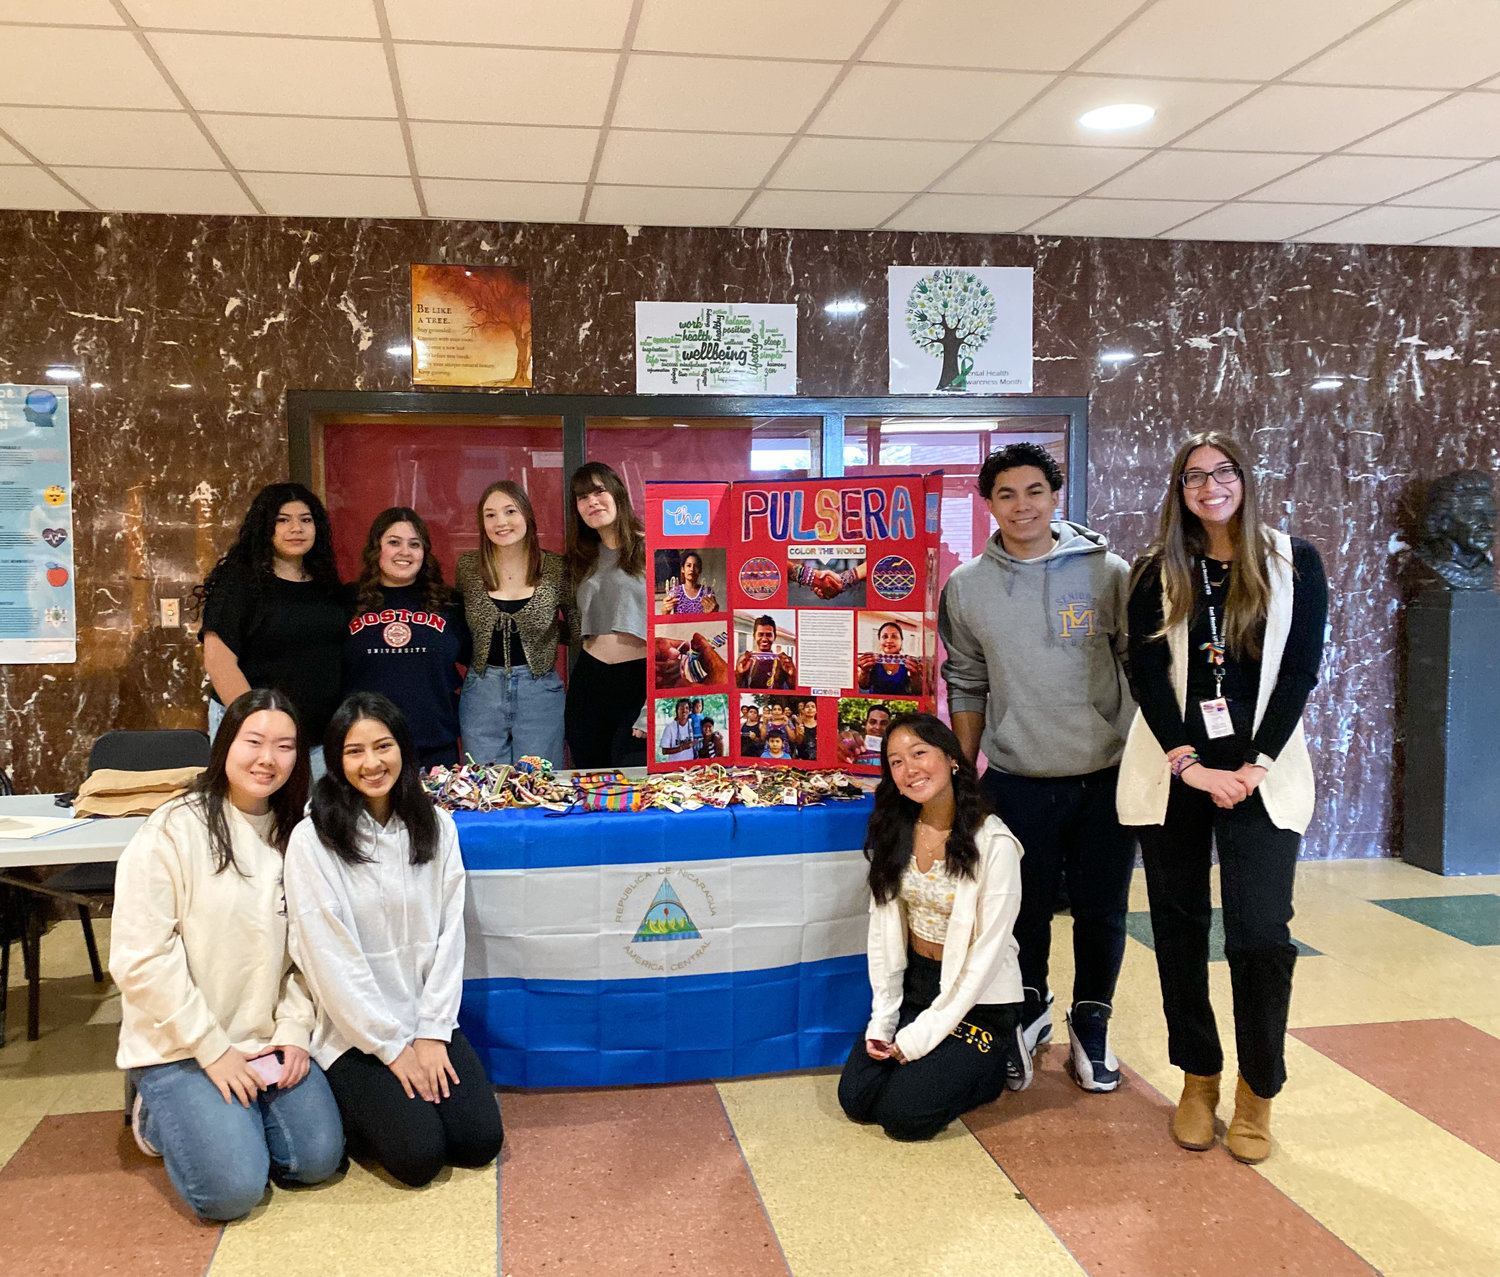 East Meadow High School’s Spanish Honor Society students recently sold bracelets for the Pulsera Project, an organization that employs artists in Nicaragua and Guatemala and pays them fair wages.